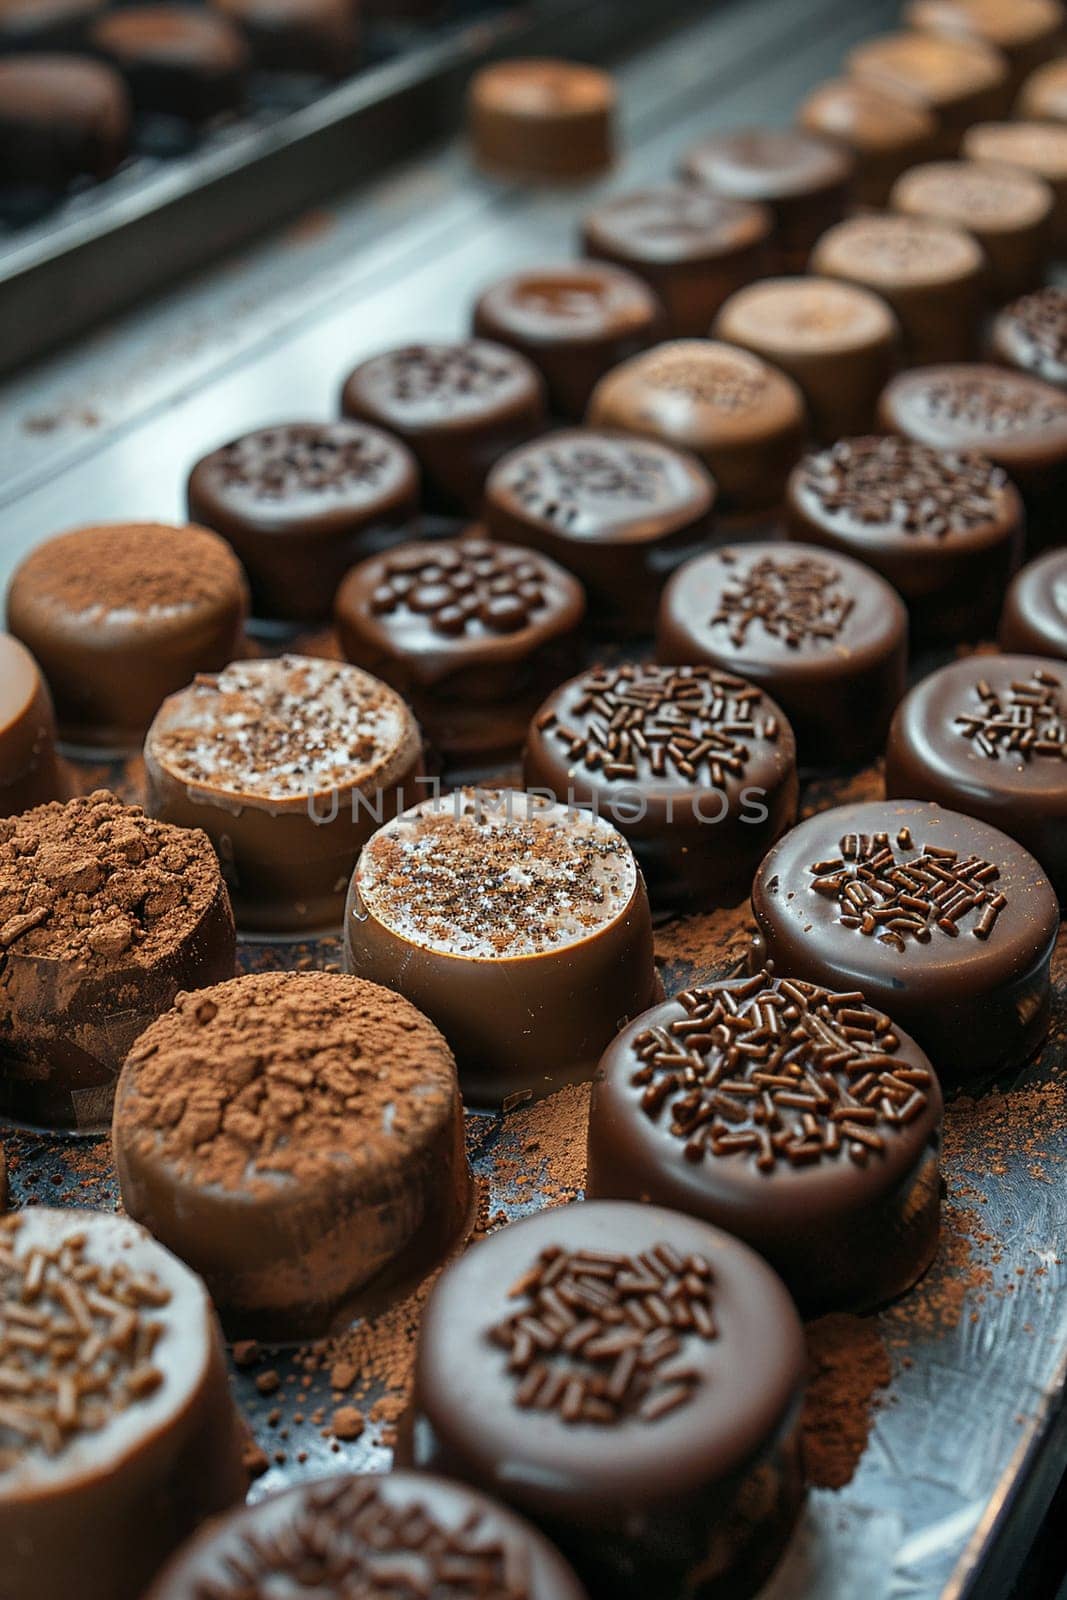 Chocolatier Studio Crafts Decadent Delights in Business of Sweet Artistry, Chocolate shavings and tempering tools mold a narrative of luxury and indulgence in the chocolatier business.